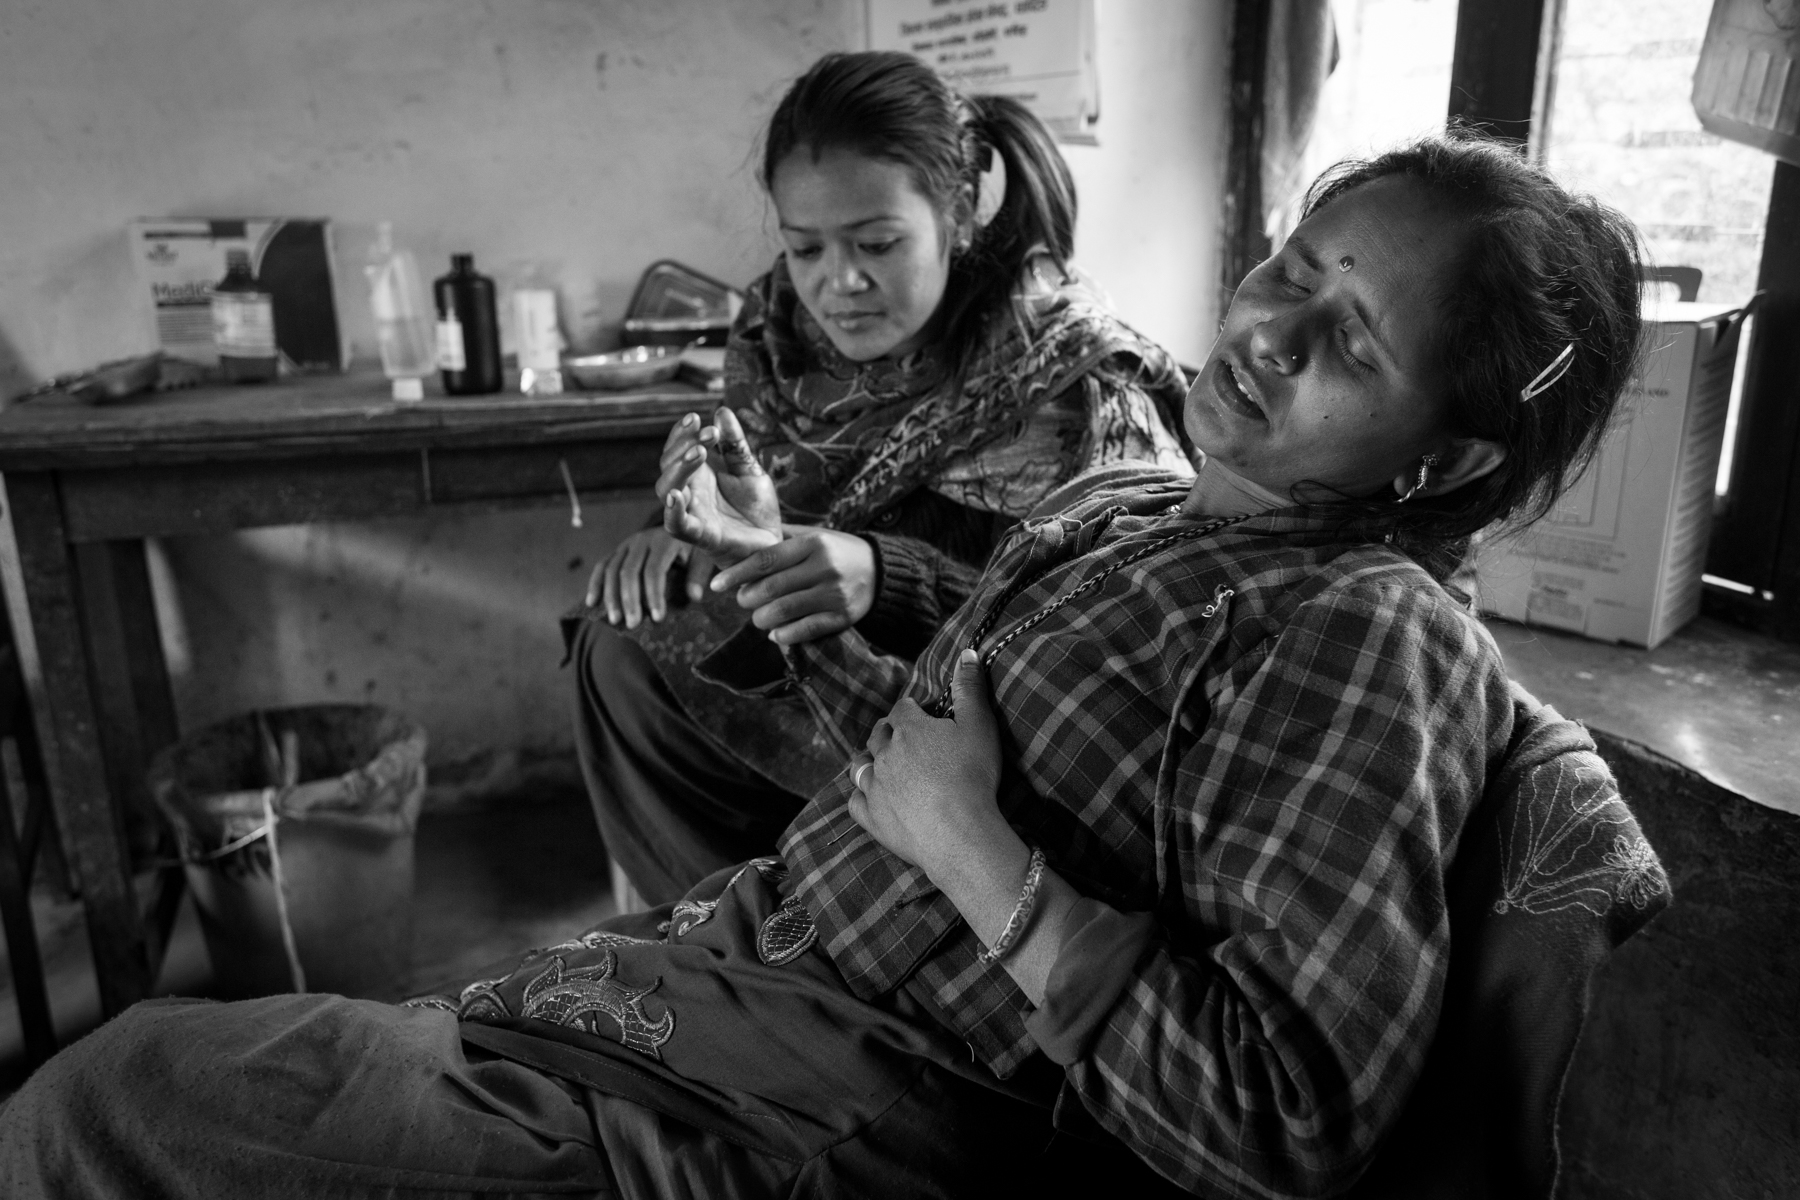 Chanamati Maggrati is being treated at her nearest health post, a 5-hour walk through the mountains. 18 December 2013, Dhading, Nepal.